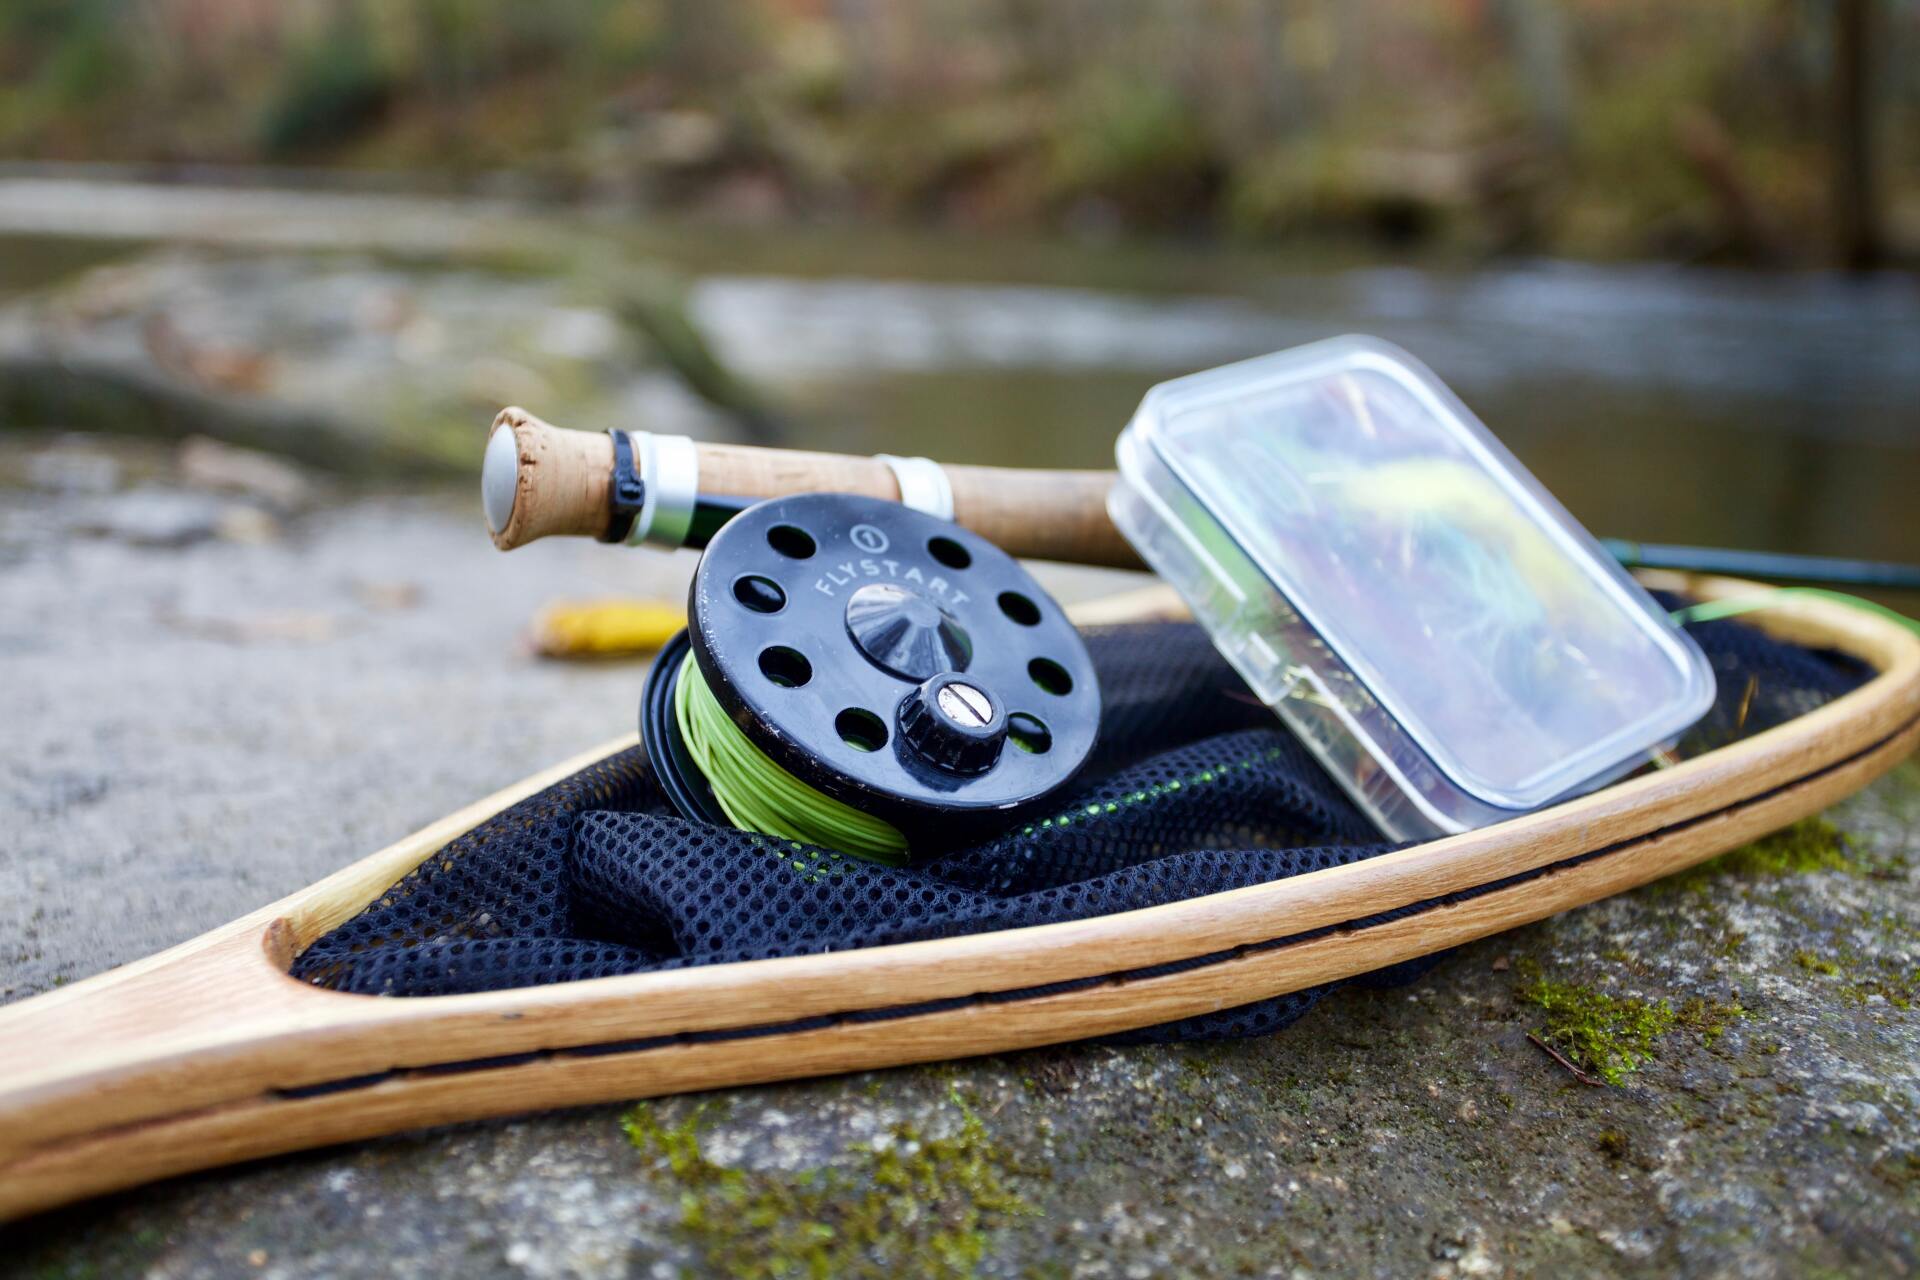 A fly fishing rod and reel are sitting on top of a wooden net.